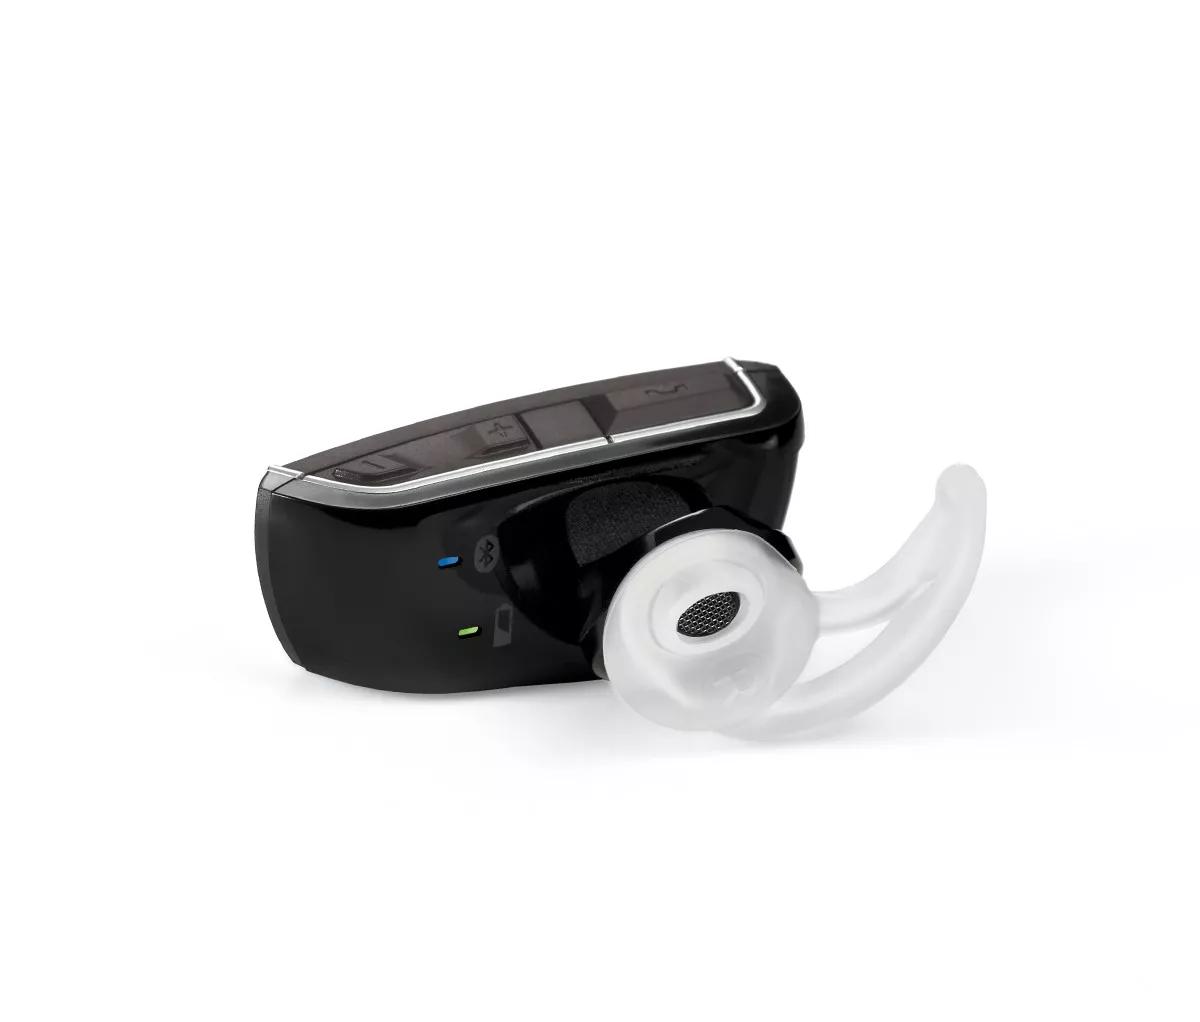 Bose® Bluetooth® headset Series 2 | Bose Support